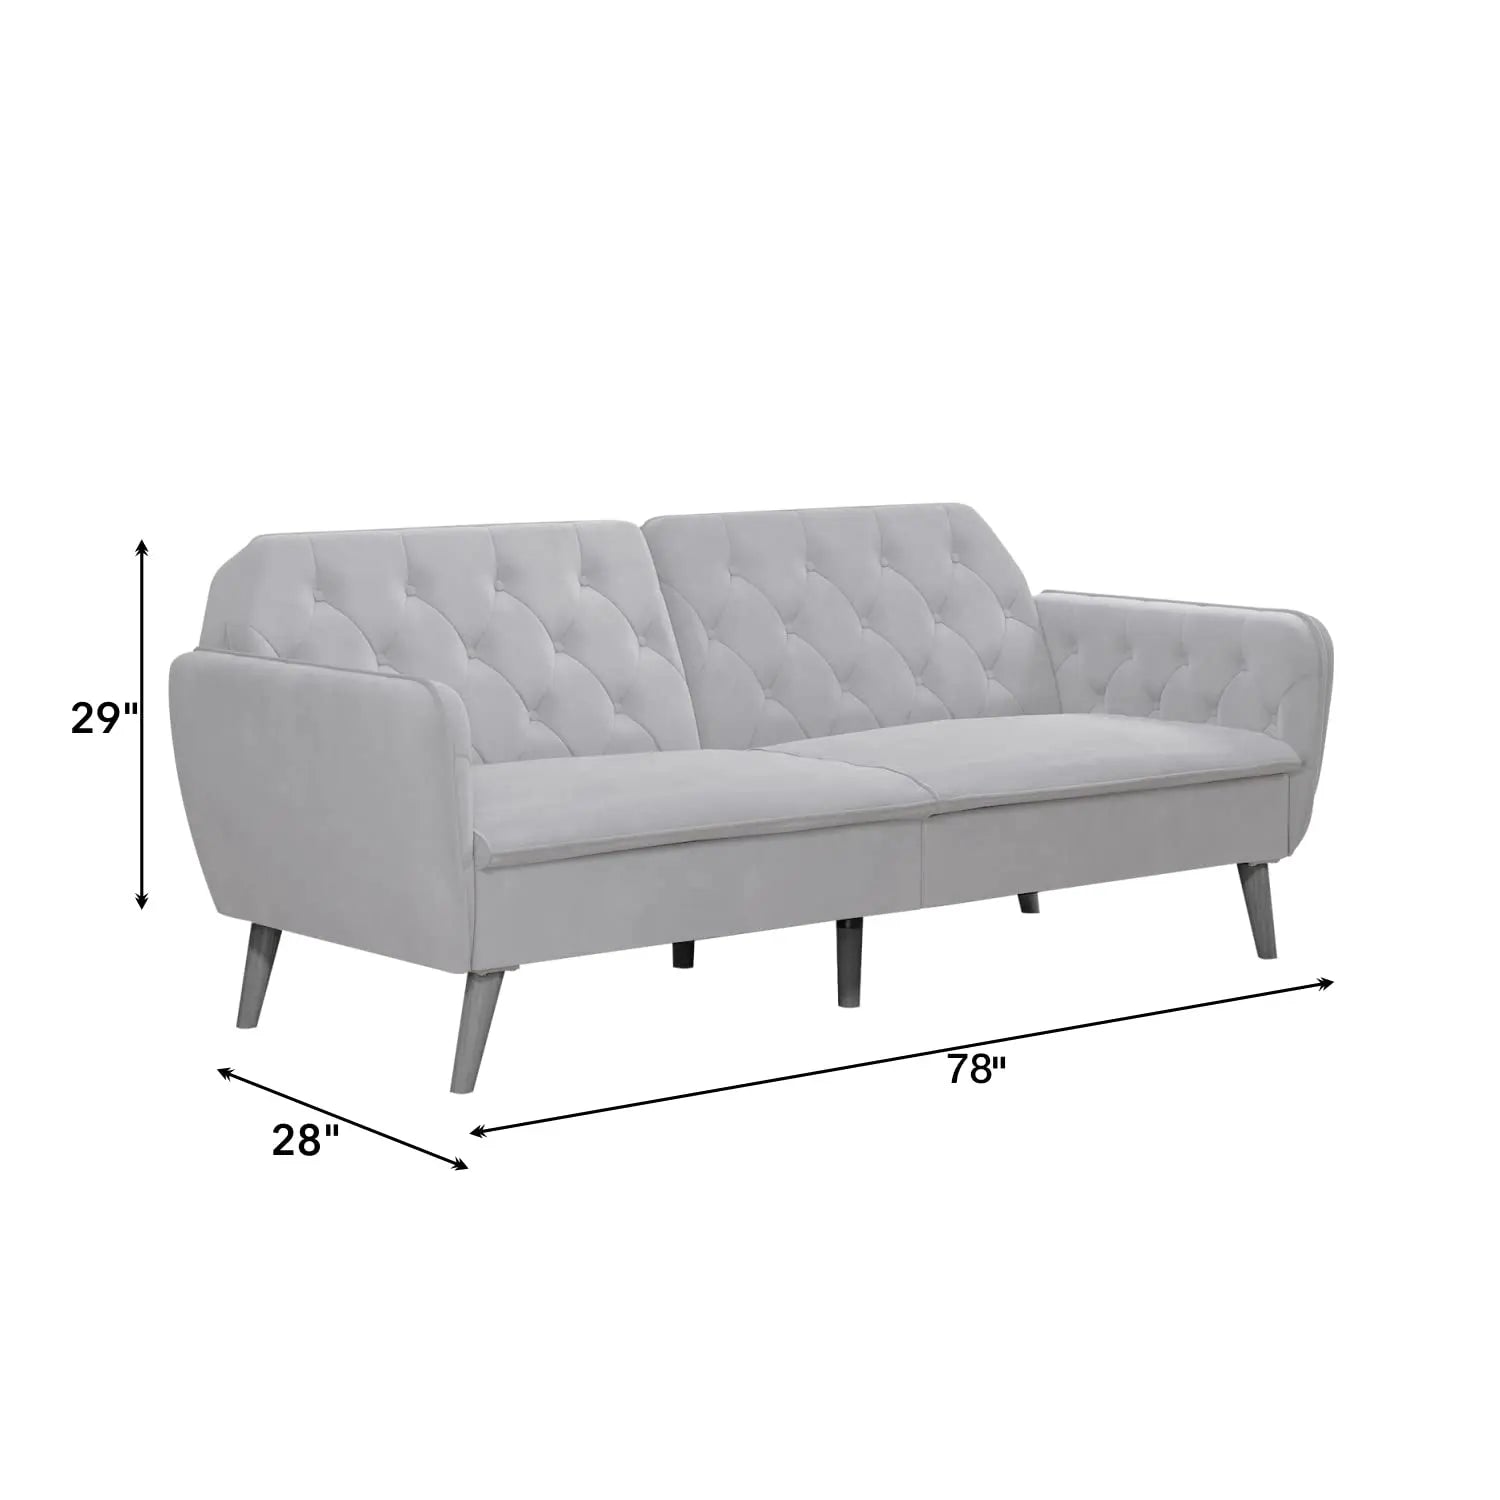 Sofa Adze- Wooden Chesterfield Sofa 3 Seater Expand back Seat Sofa cum Bed for Home & office | Wooden Sofa for Living room Furneez